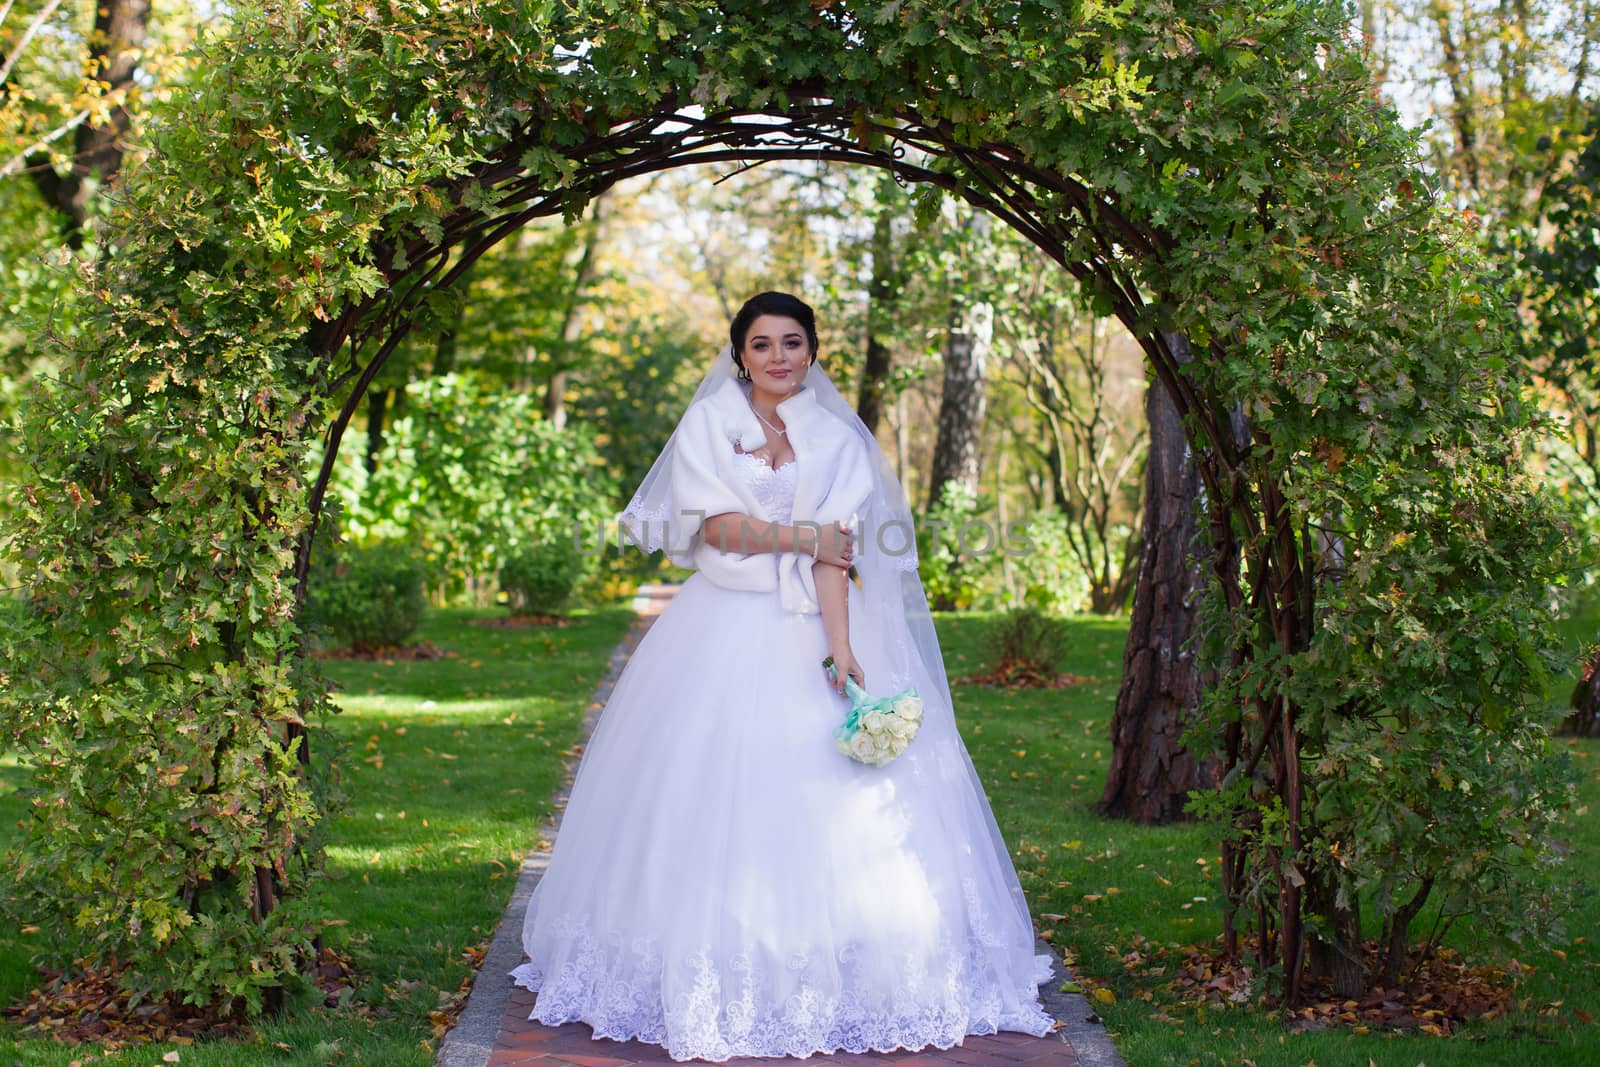 A stylish bride with a bouquet in her hands is standing under a green arch